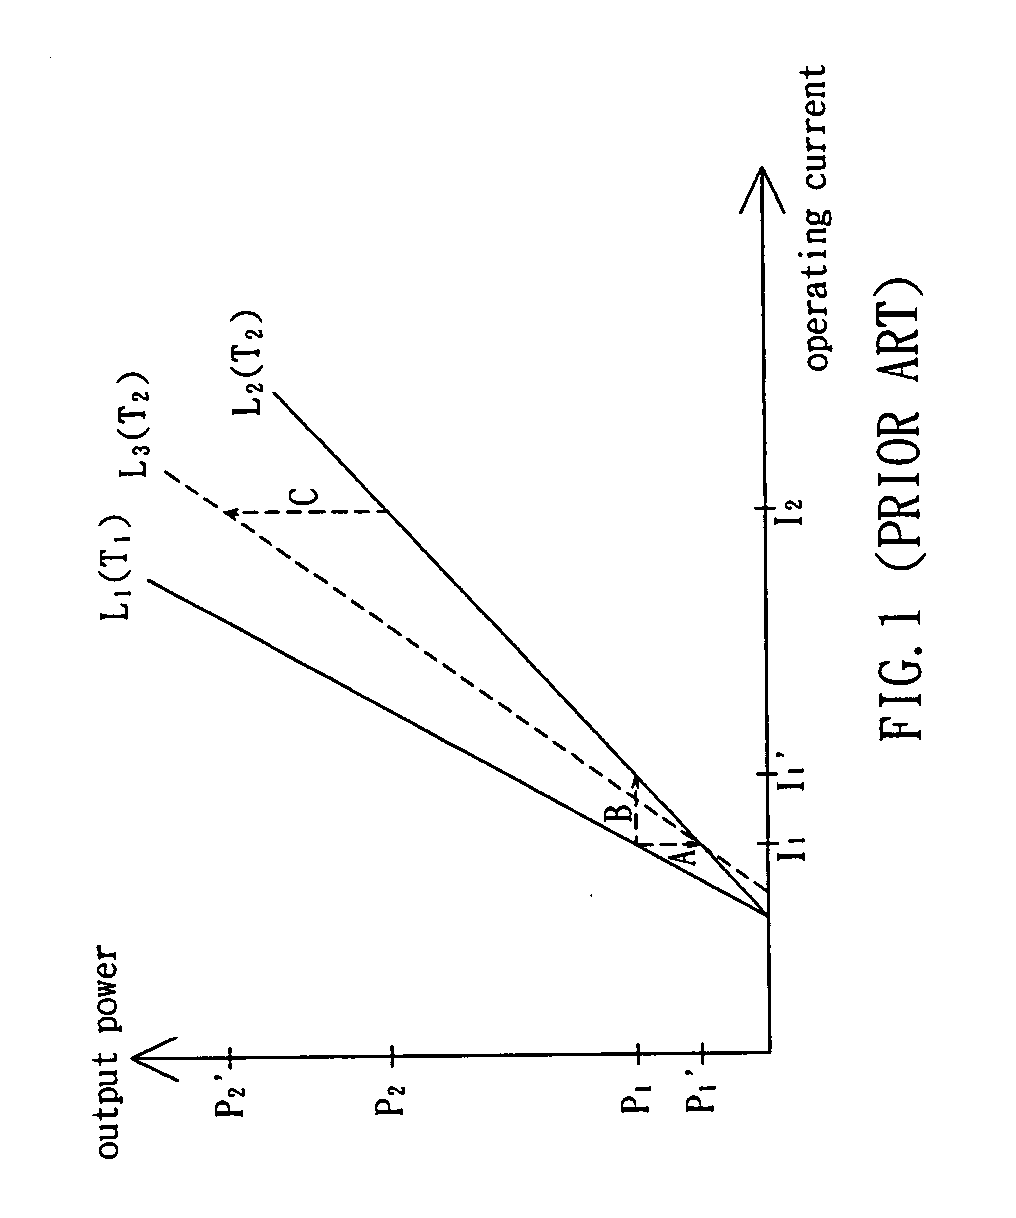 Operating current modifying device and method